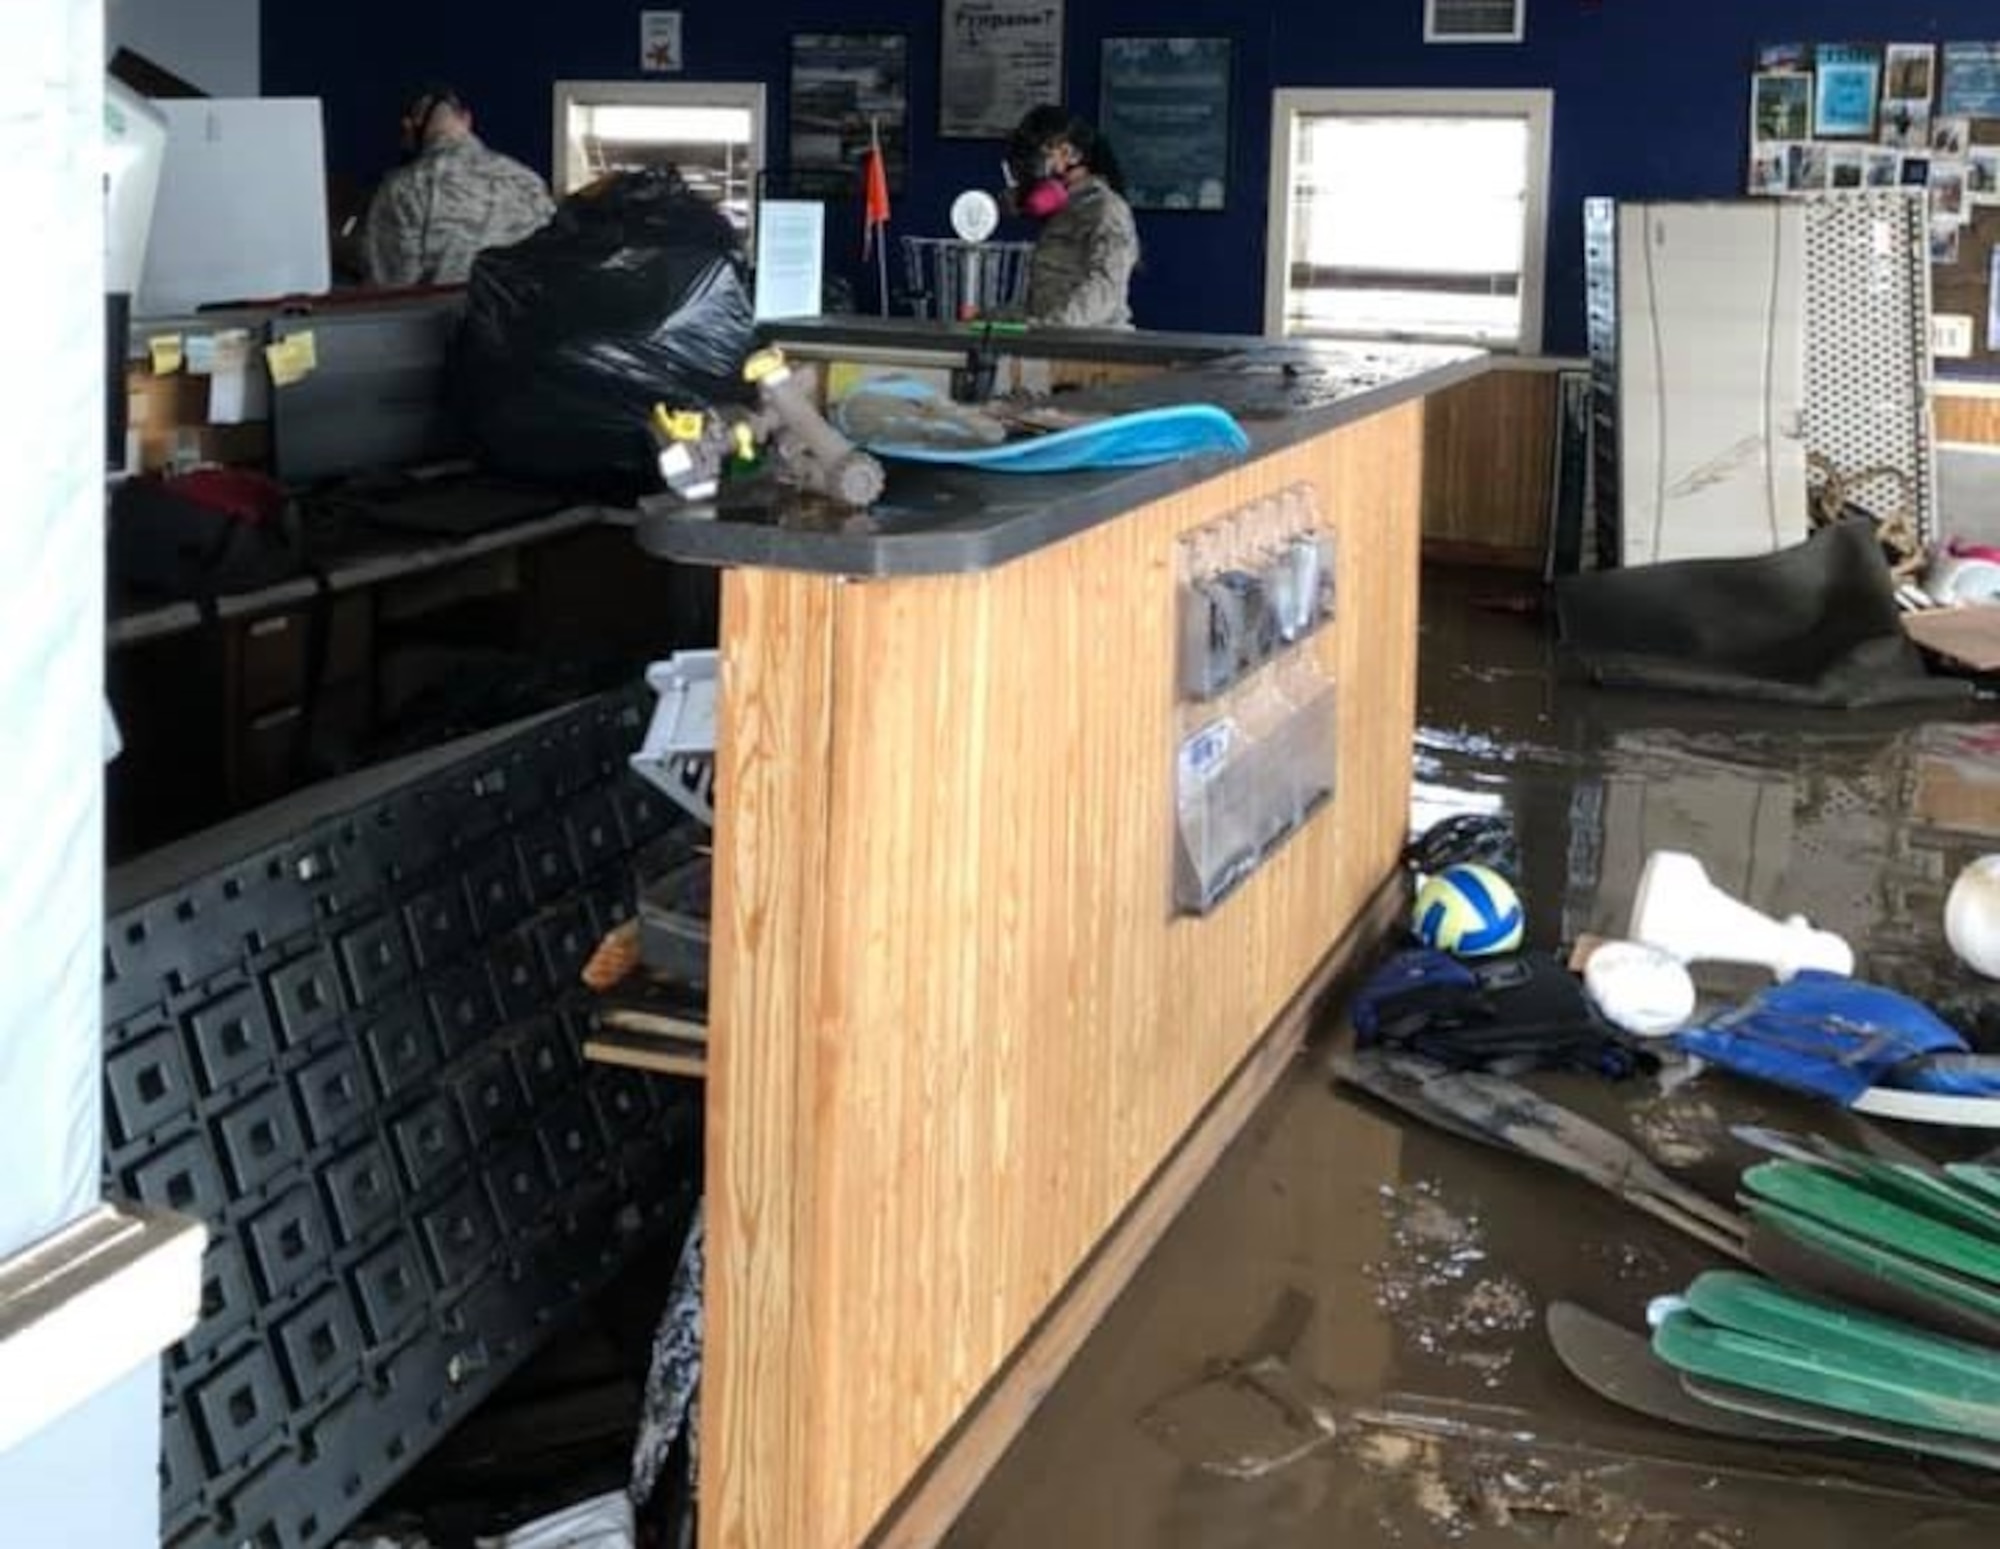 Airmen survey damage after flooding at a recreation center at Offutt Air Force Base, Neb. in  2019. A season of heavy snowfall, combined with a late winter storm in the middle of March 2019, left roughly 30% of the installation flooded.